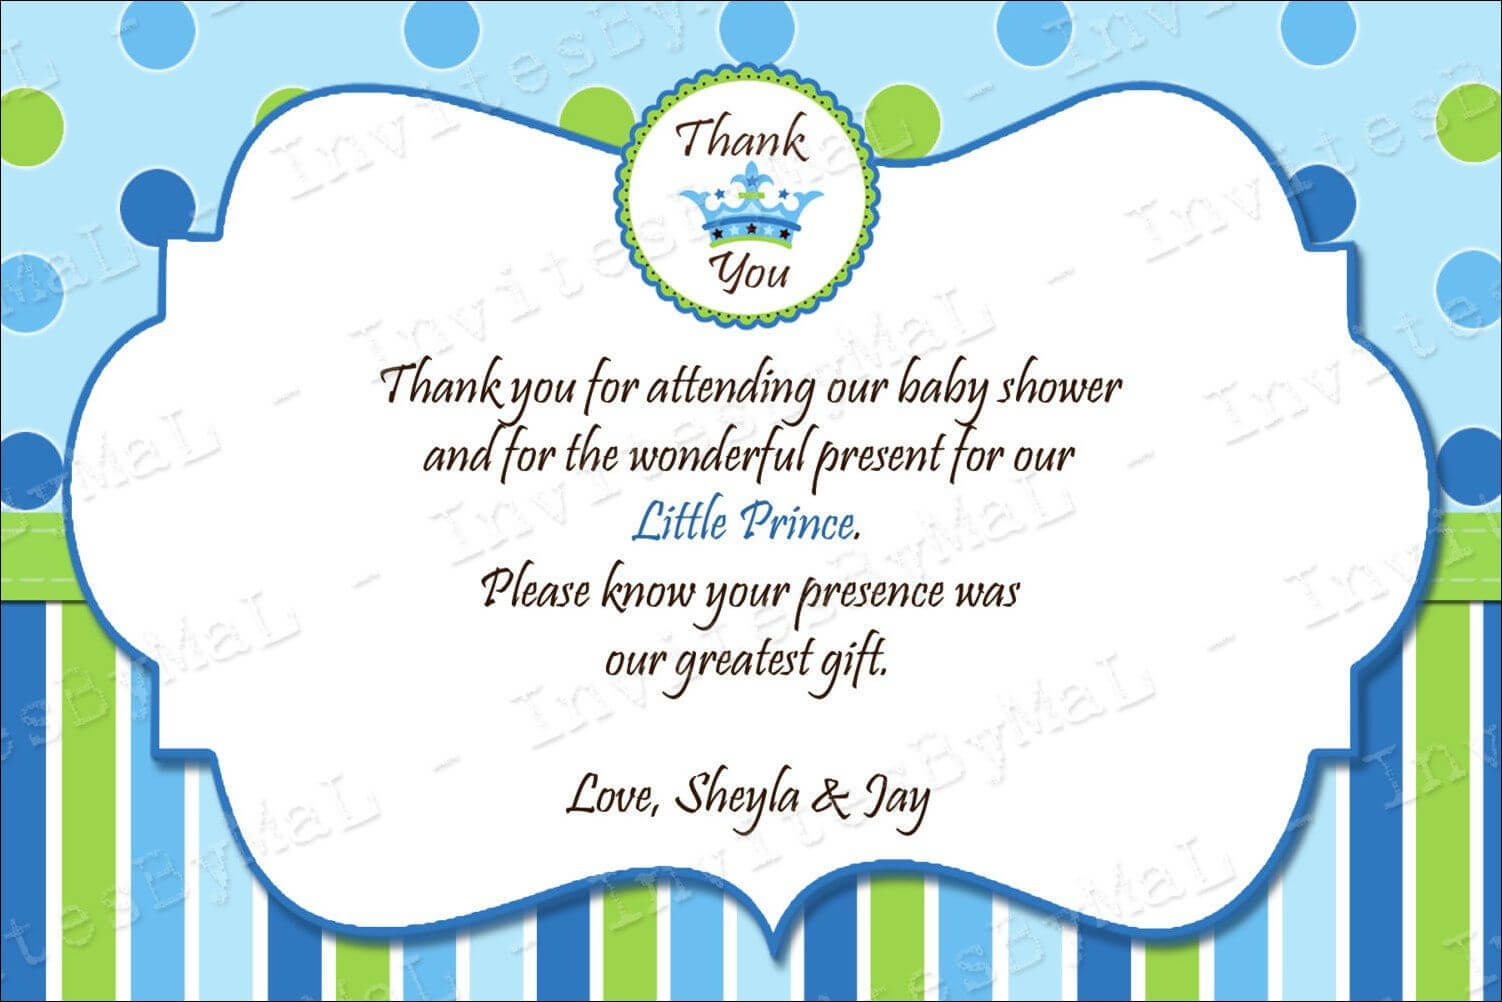 40 Beautiful Baby Shower Thank You Cards Ideas | Baby Shower With Regard To Thank You Card Template For Baby Shower